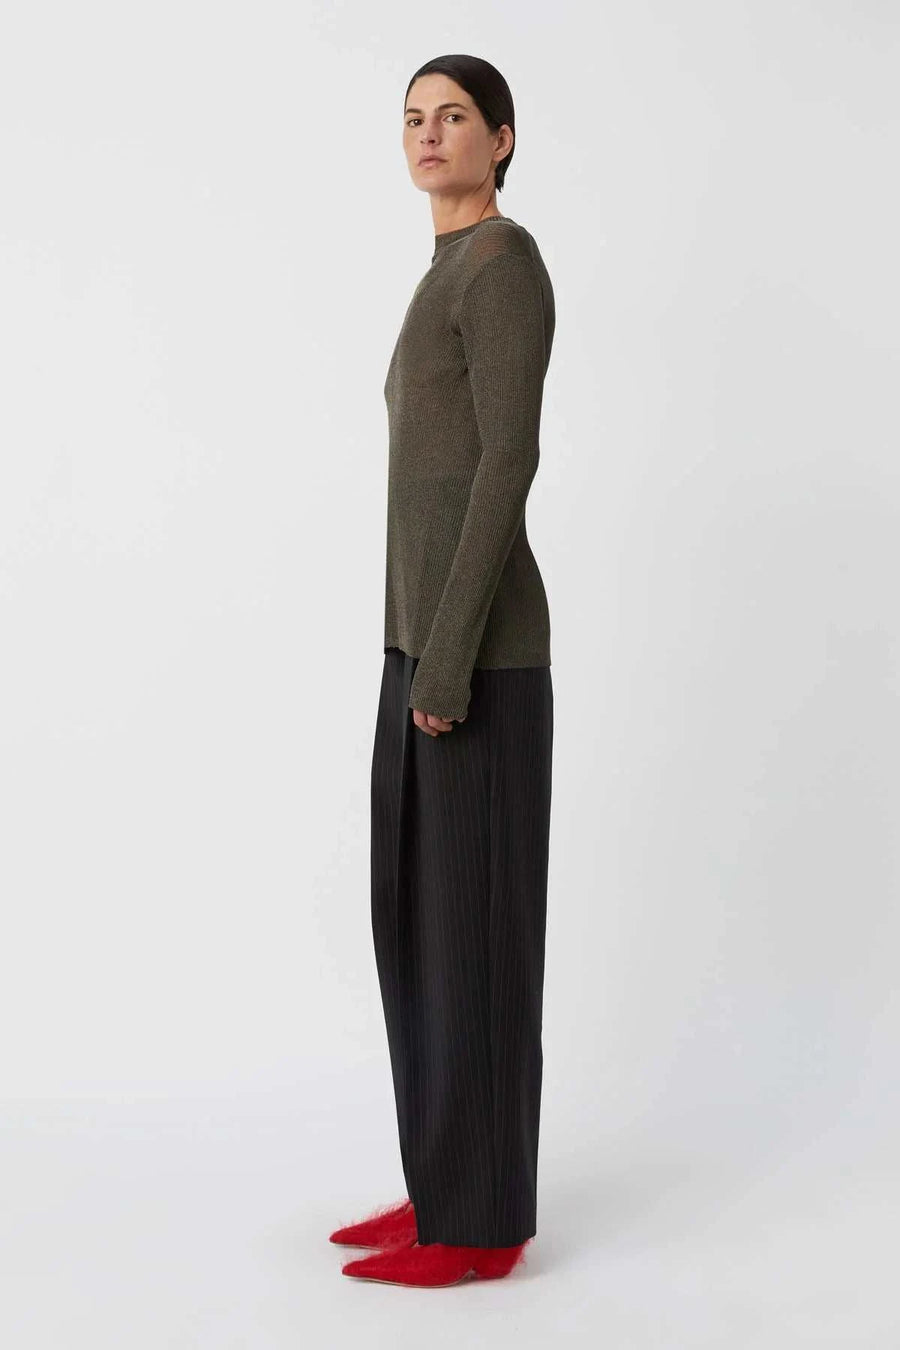 Camilla and Marc Neveah Long Sleeved Top Gunmetal